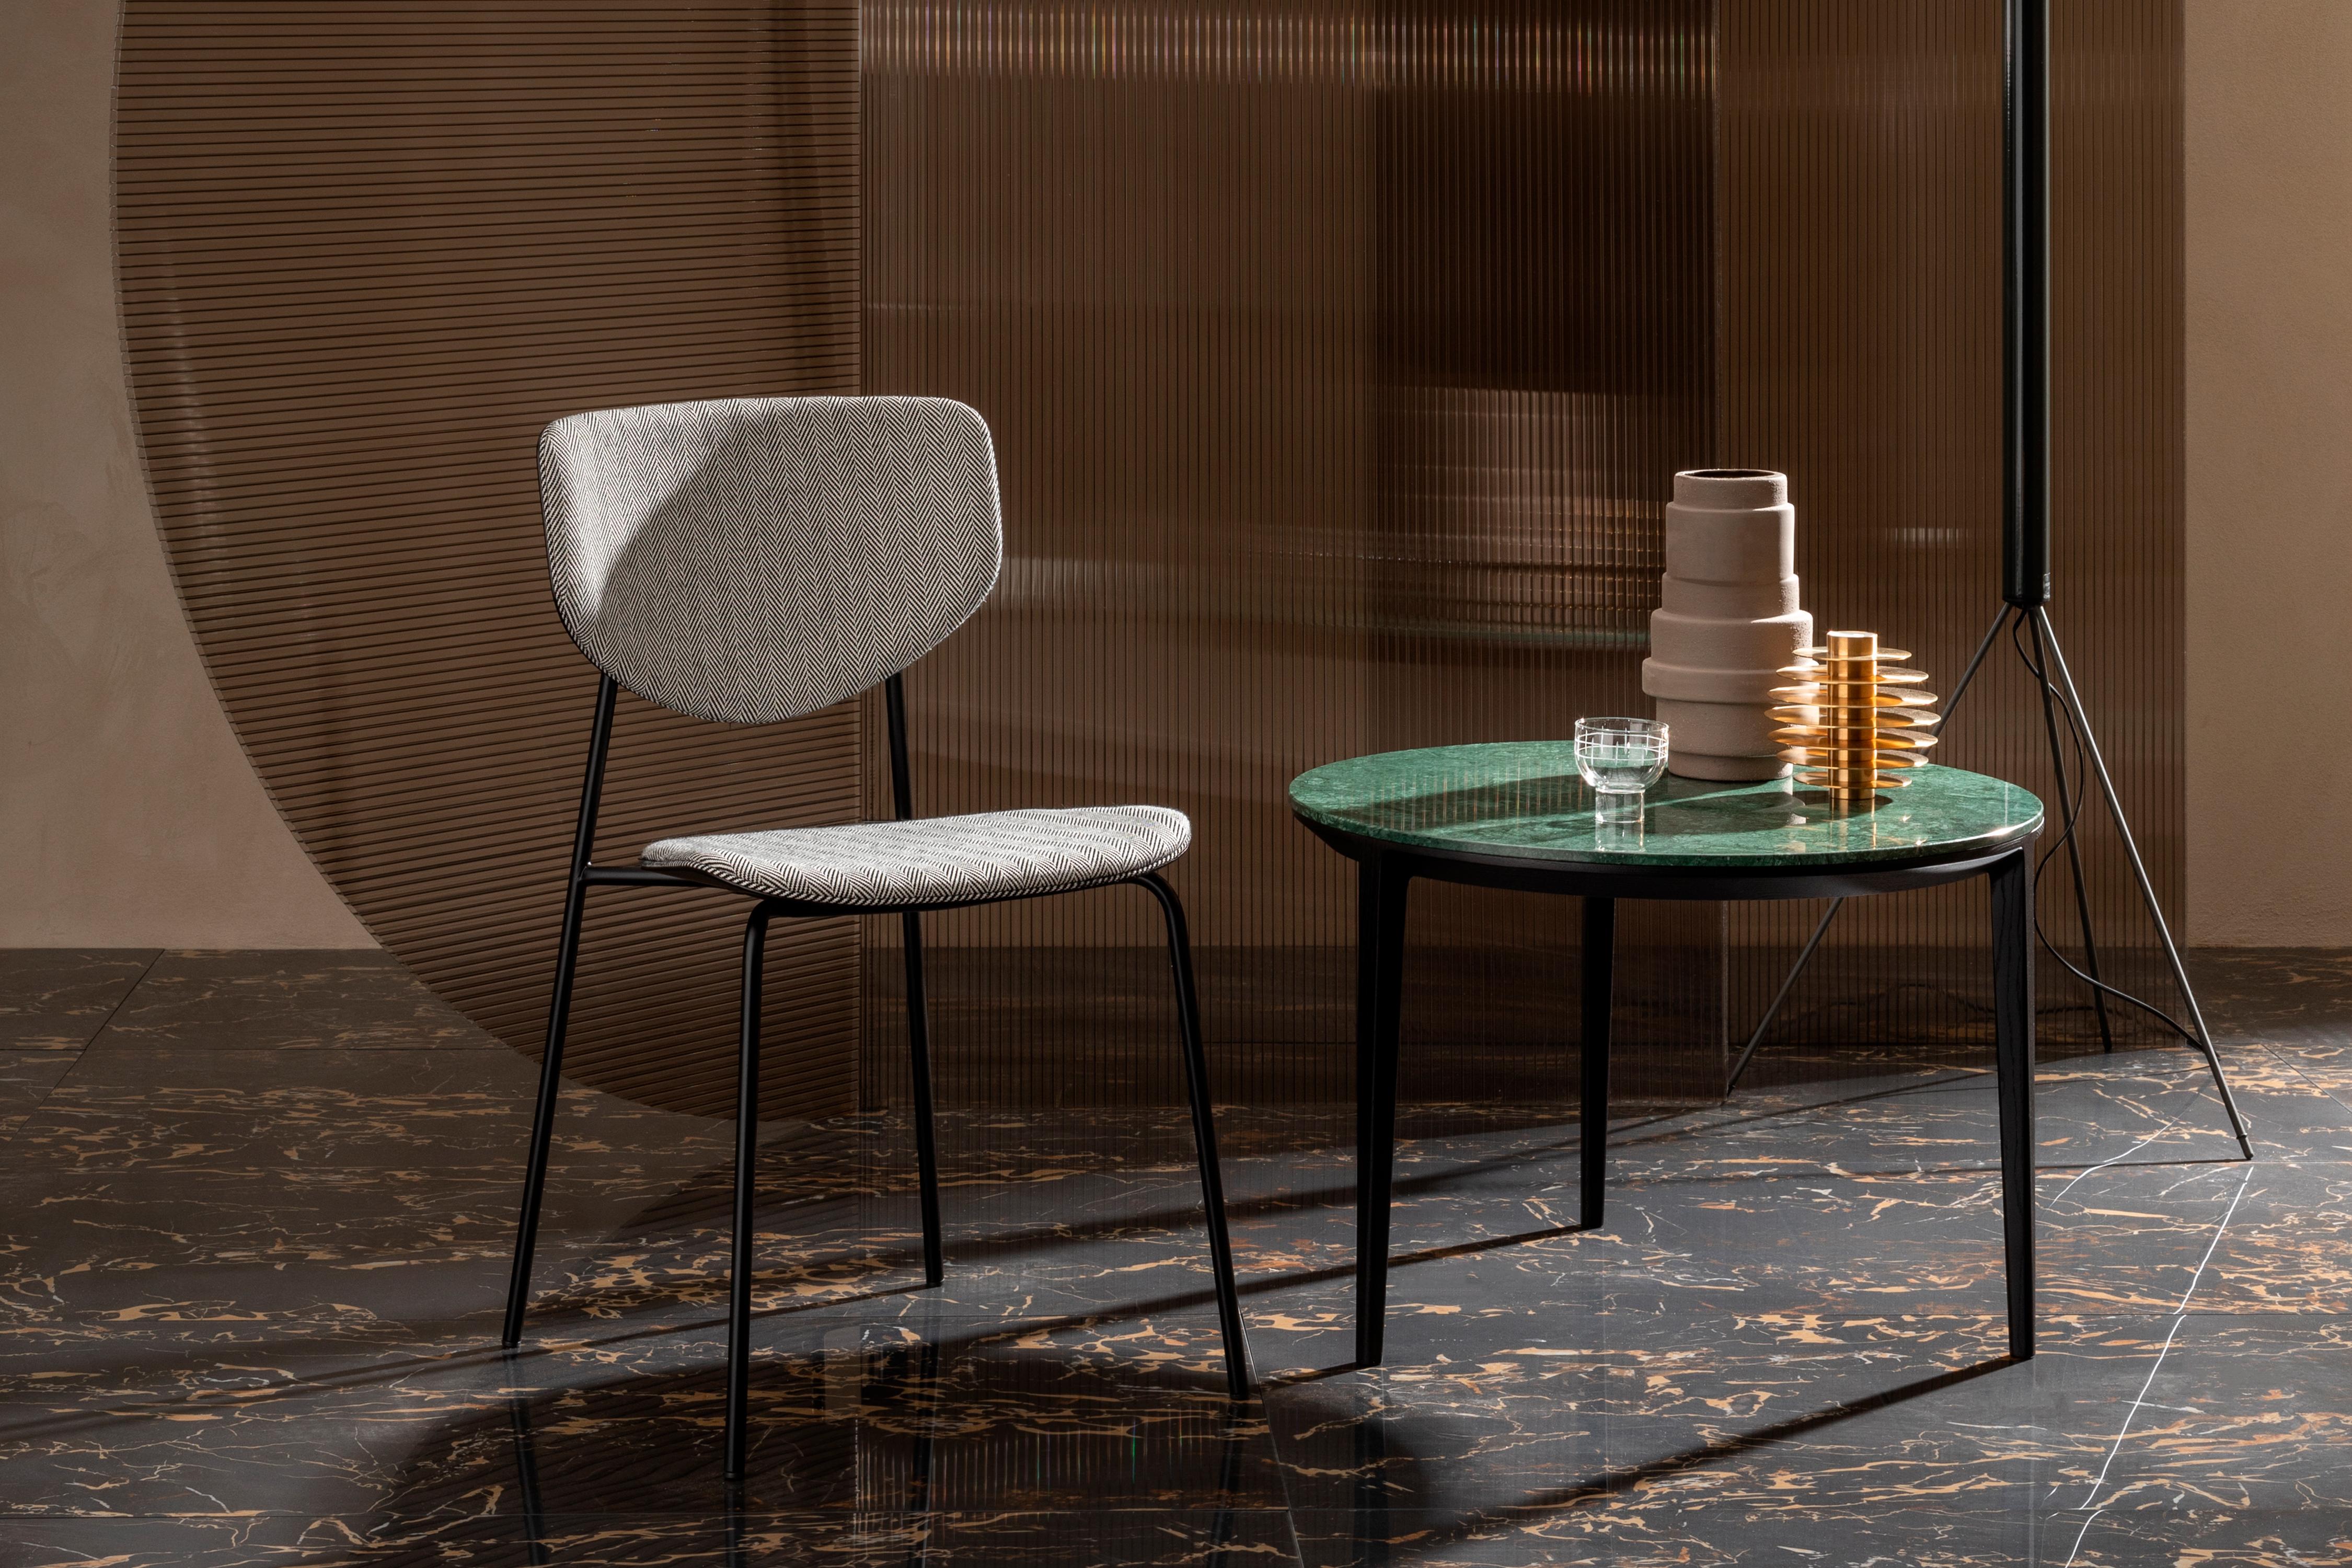 The Etoile tables feature a distinctive three-legged design that facilitates nesting or use as a service element. 
A subtle shadow line detail separates the tabletop from the frame, conveying lightness and beauty.
Etoile's FSC certified timber